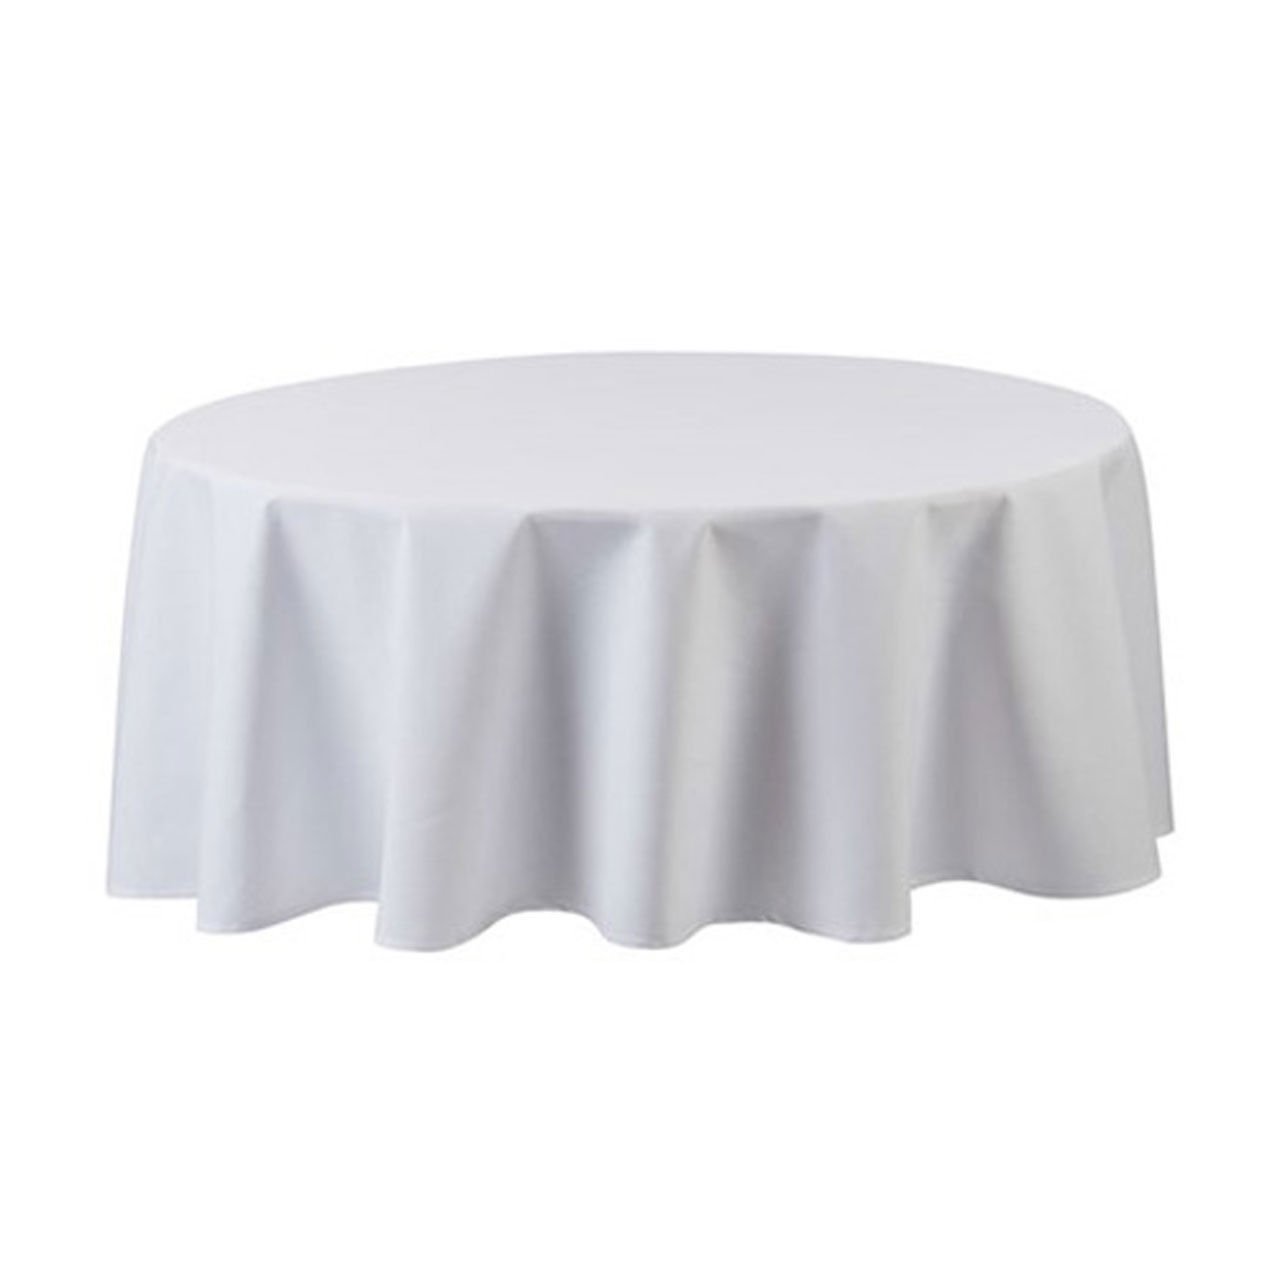 What's the quantity of 120 round tablecloths per case?